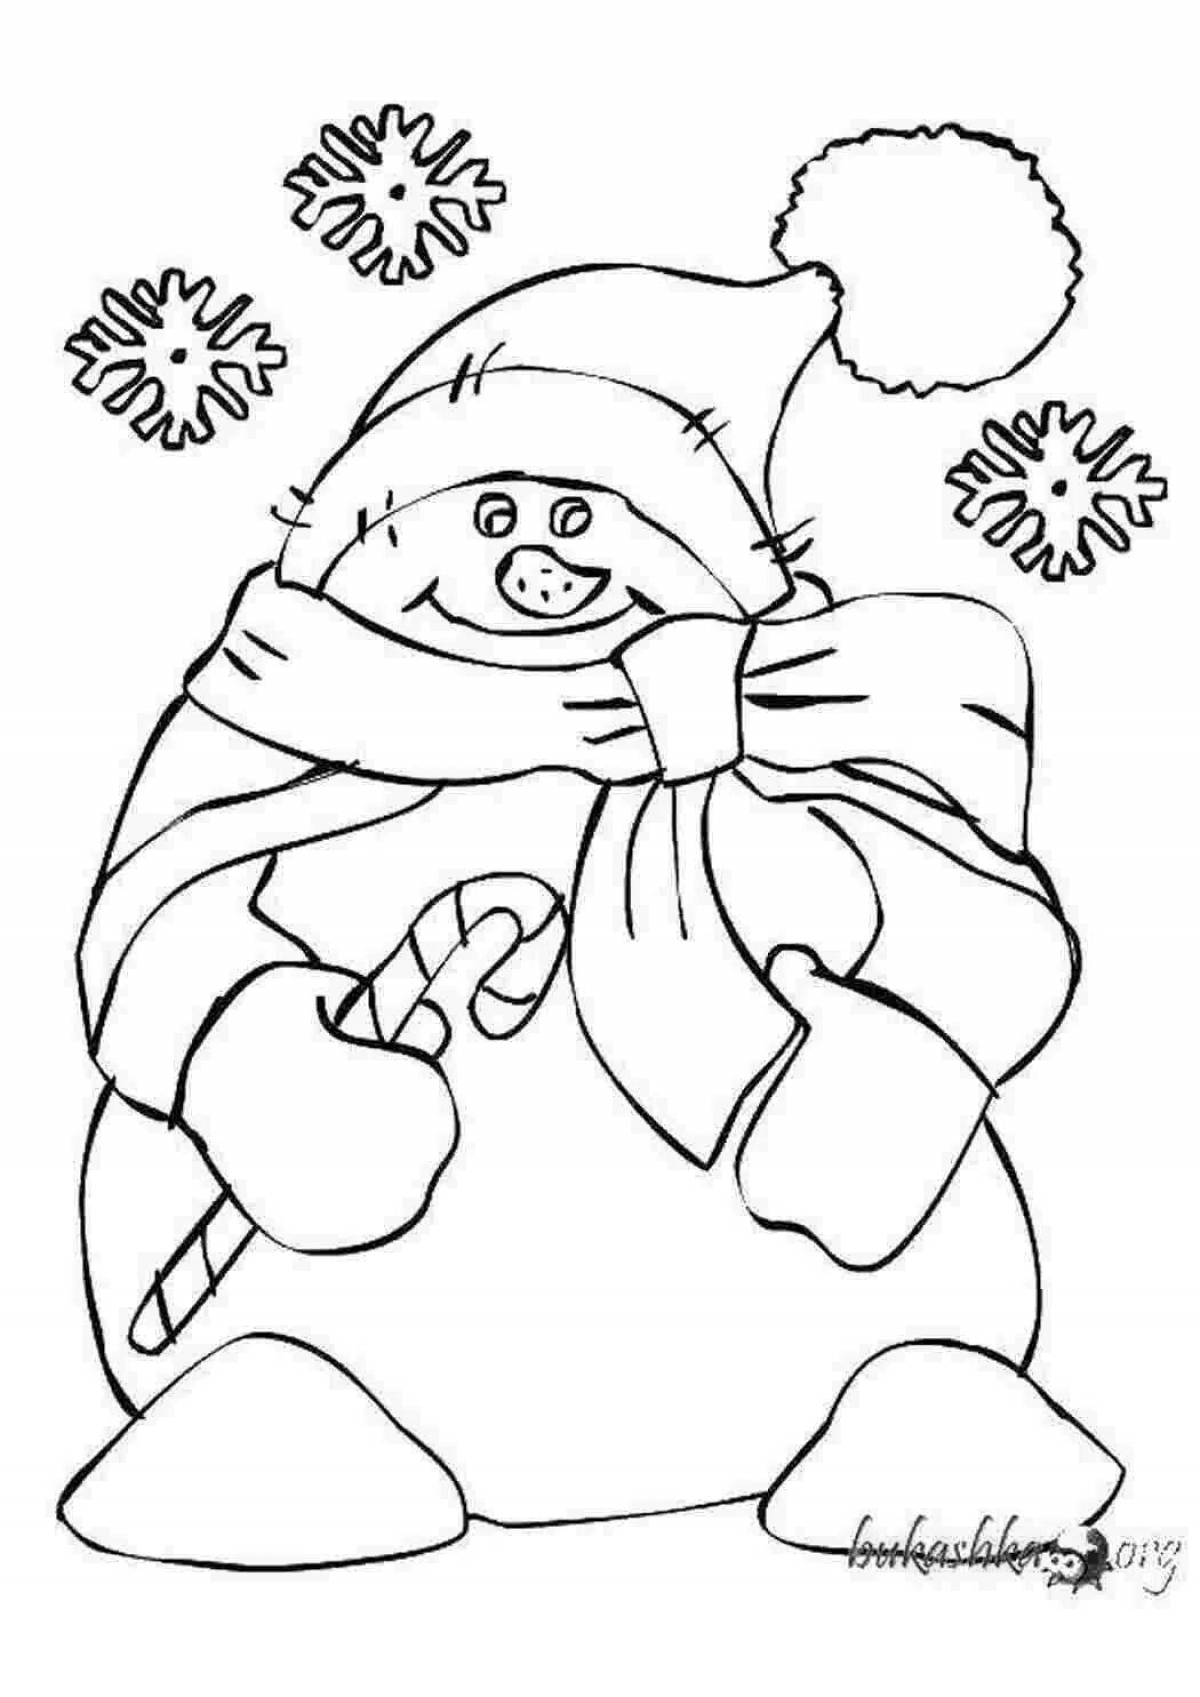 Great january coloring book